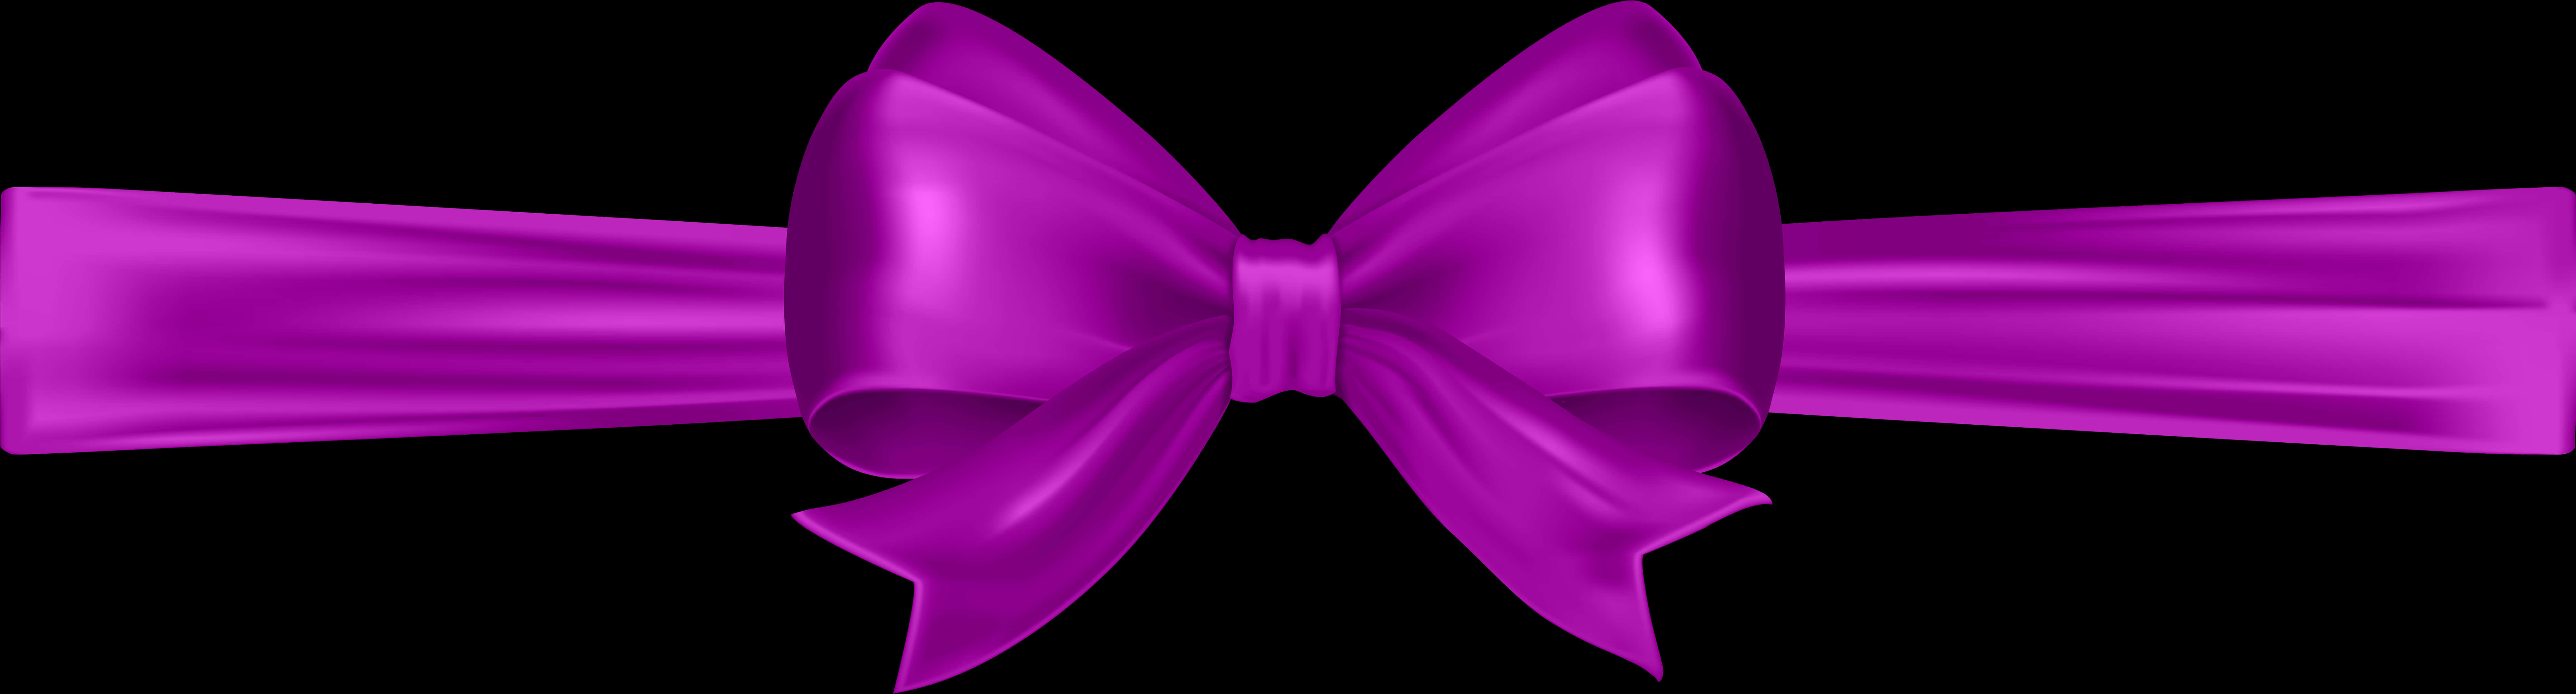 Purple Satin Gift Bow PNG